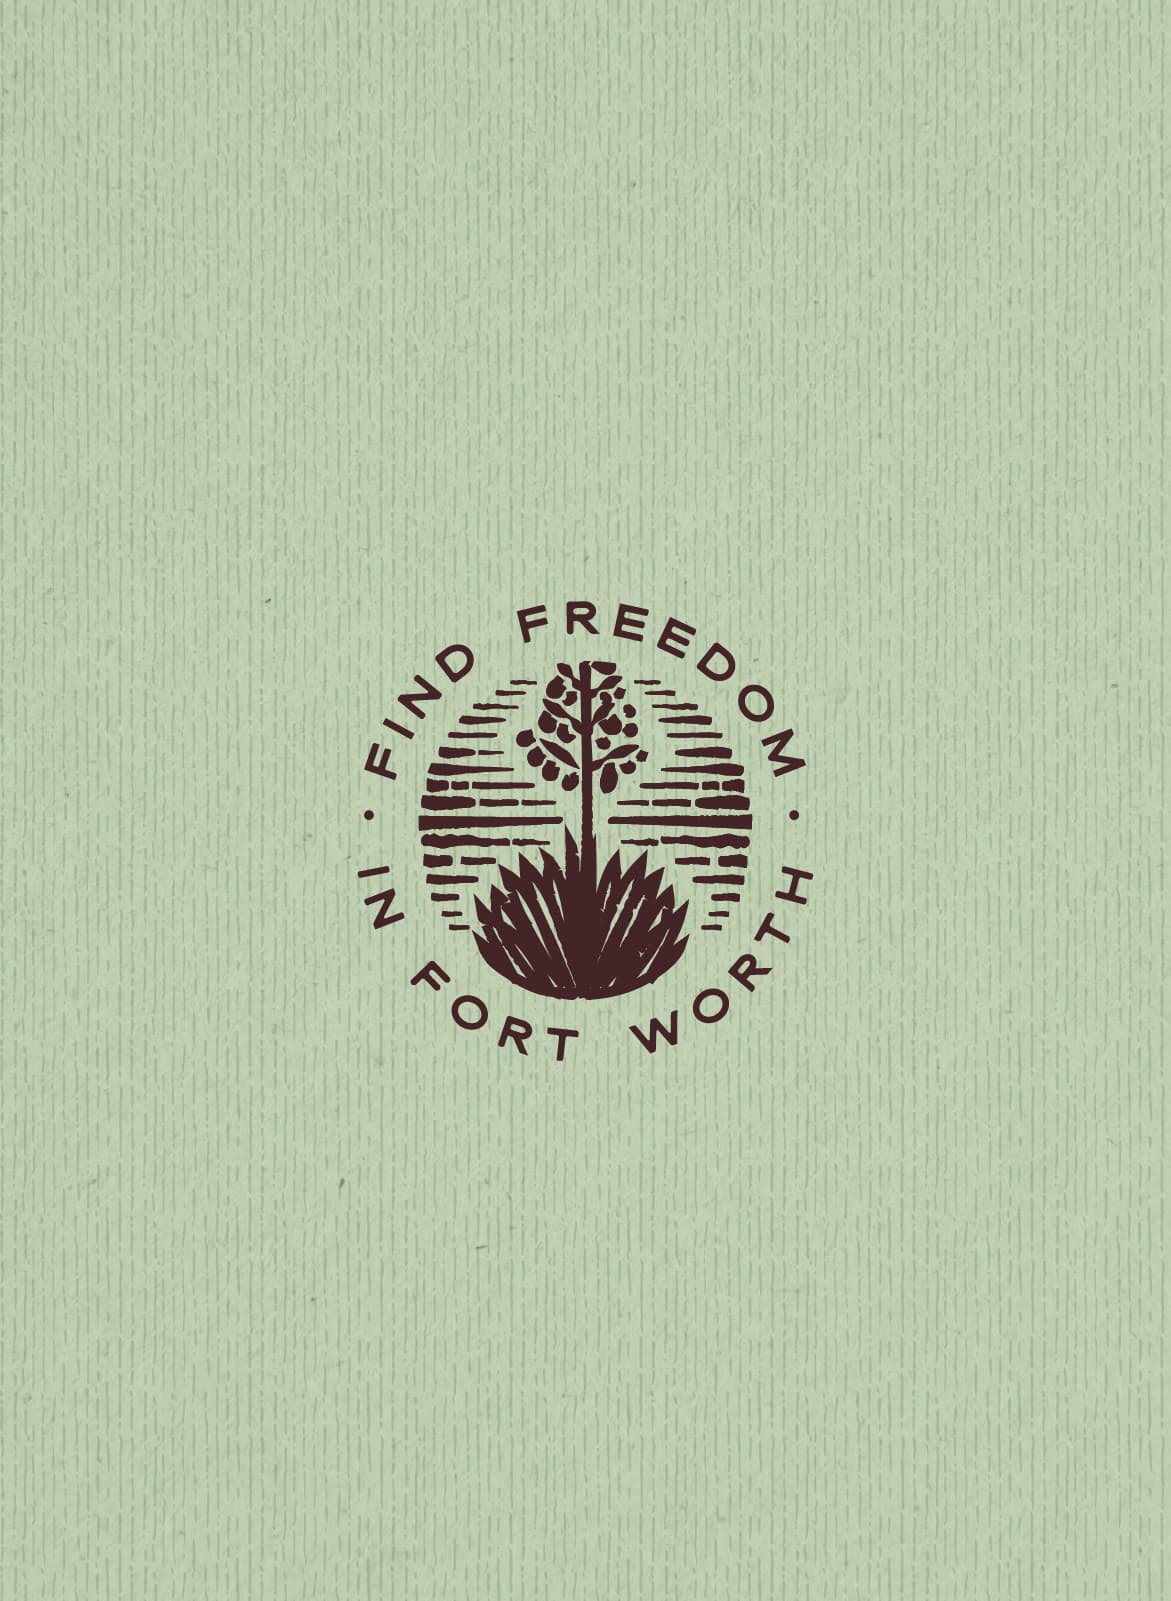 Panther Island RV Resort graphic design seal find freedom in fort worth